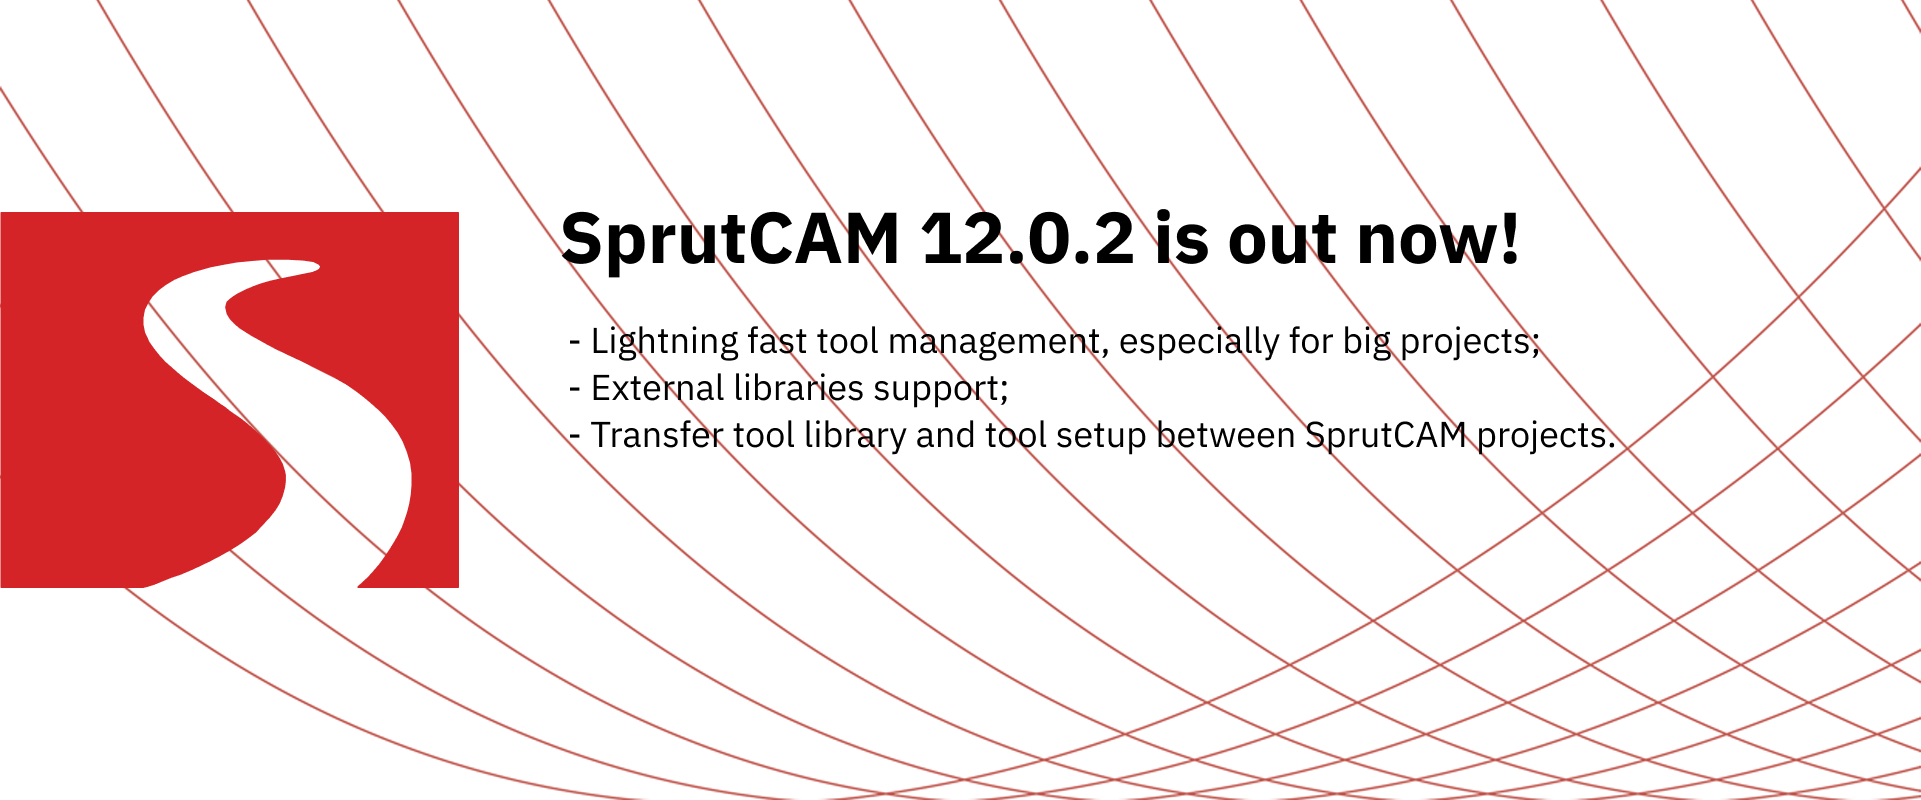 SprutCAM 12.0.2 is out now!